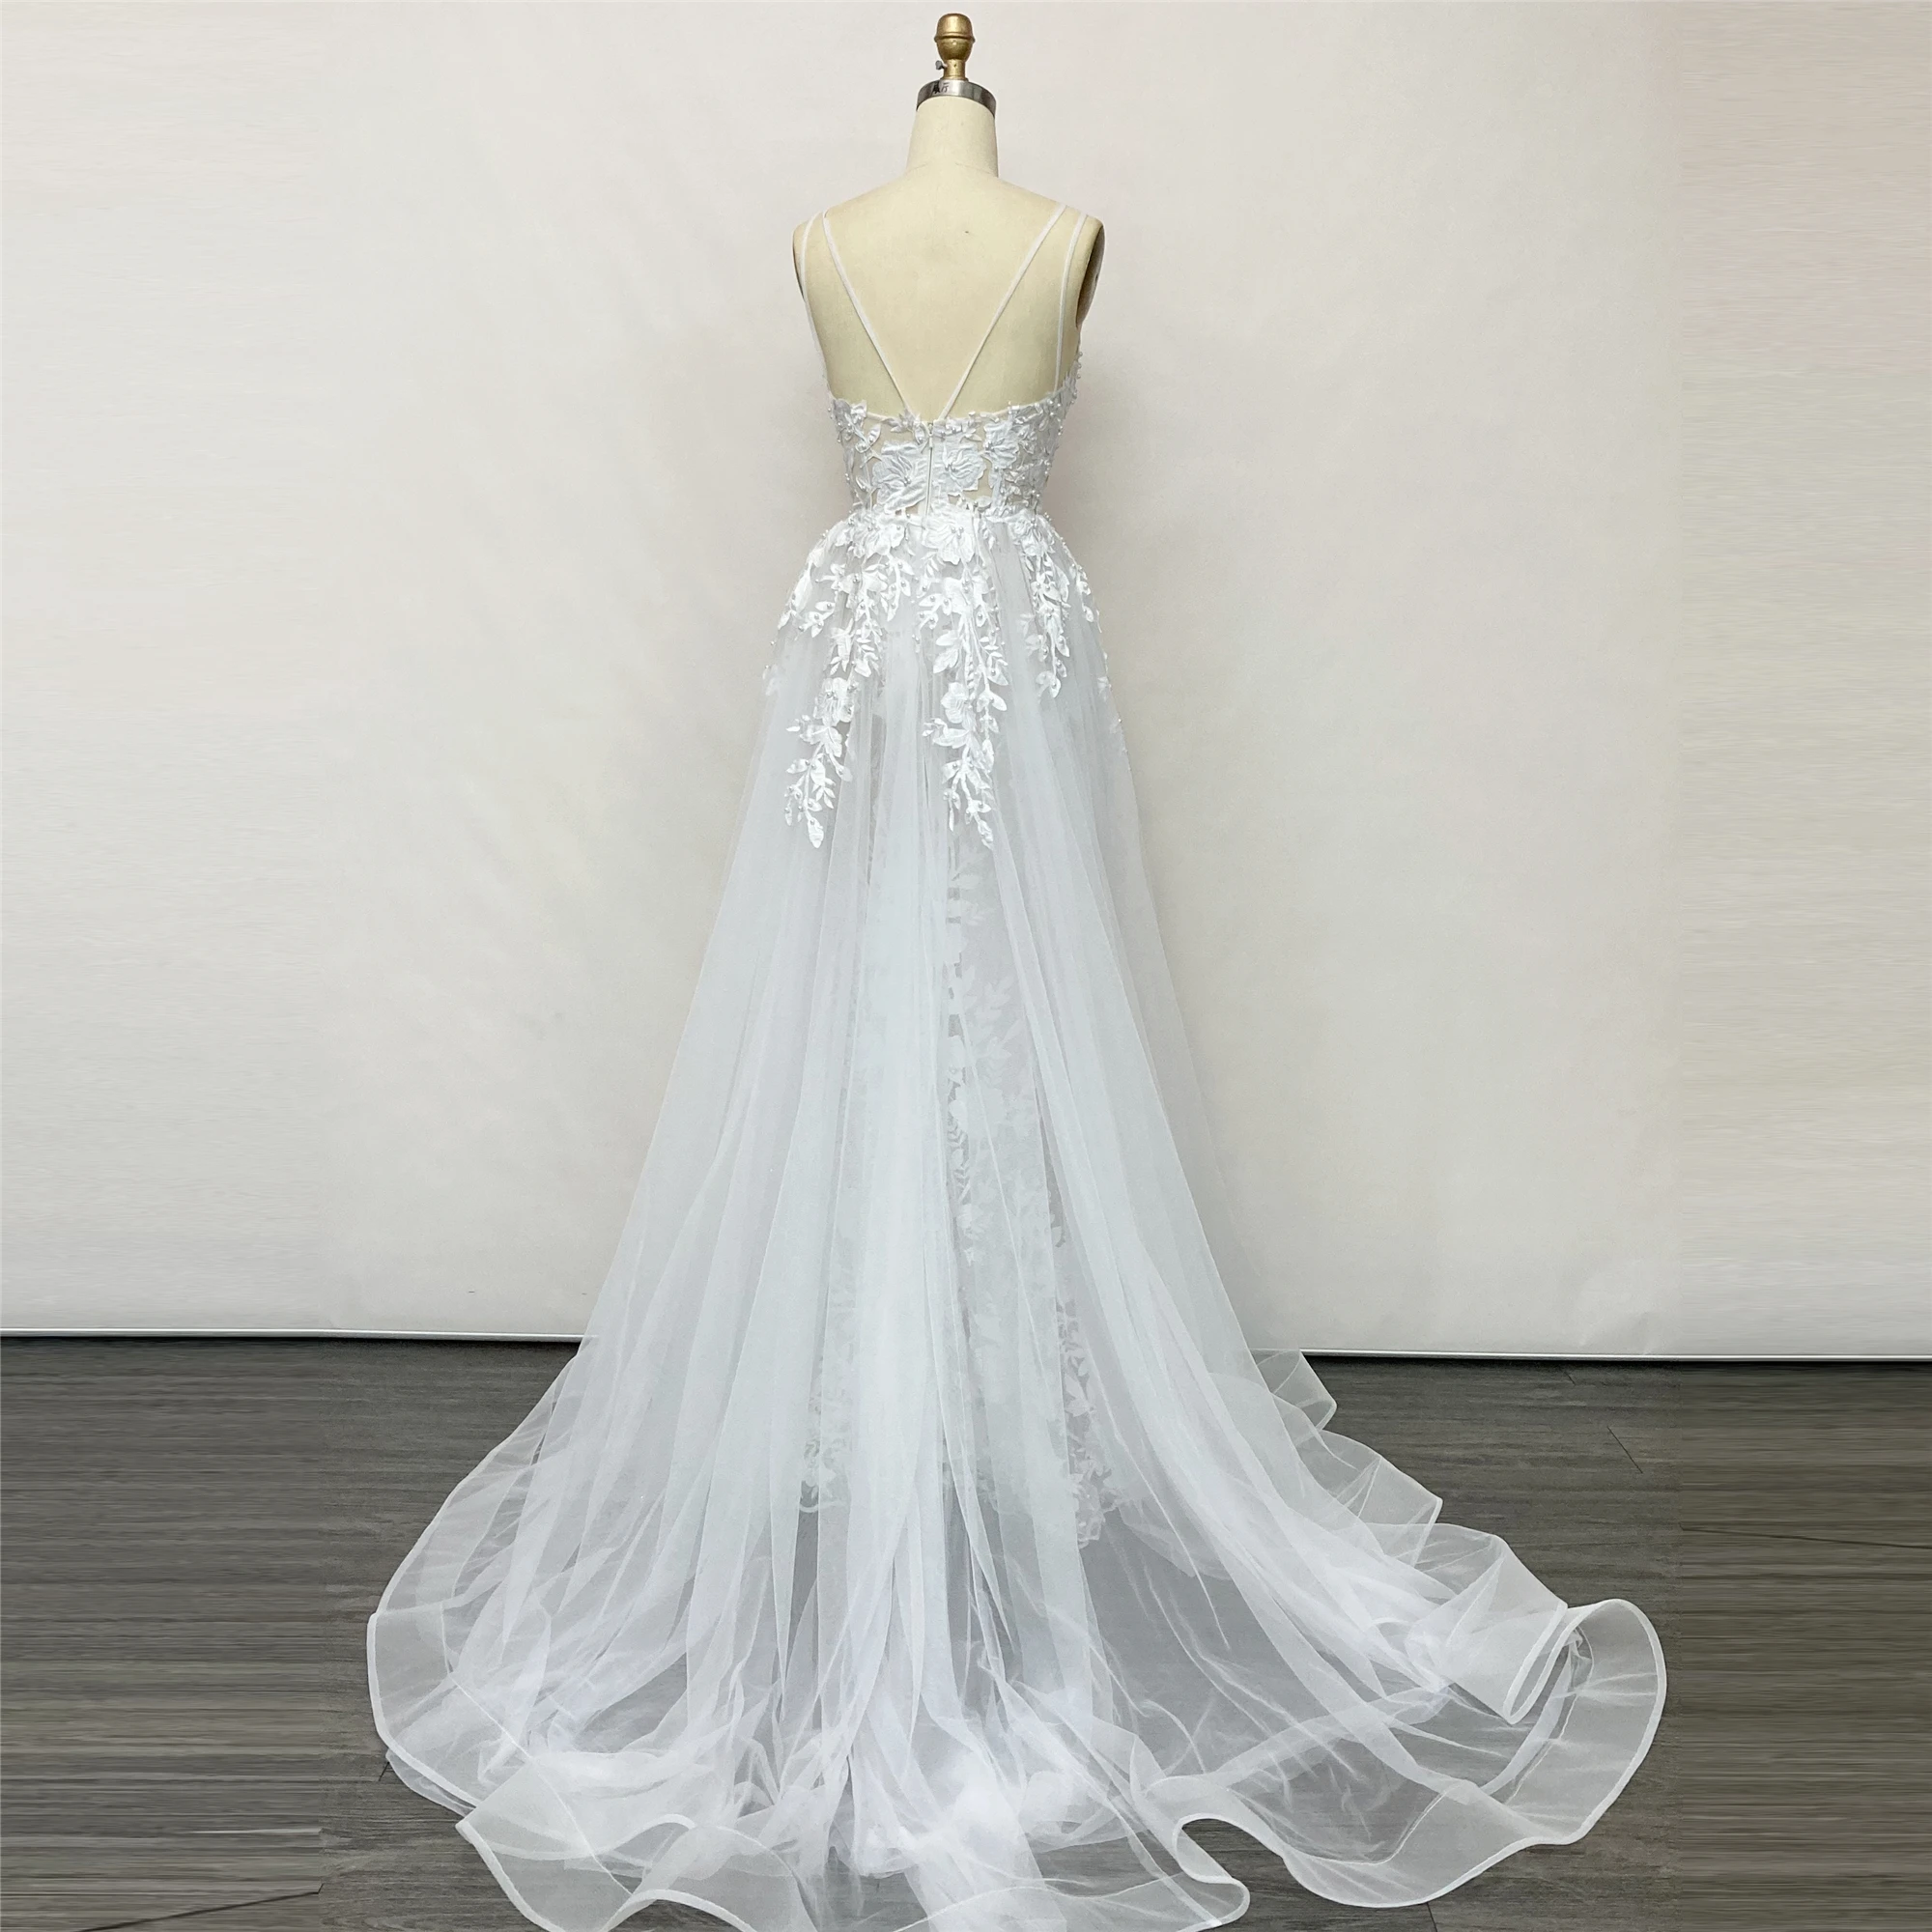 Ladies  Flower Lace Embroidered  spaghetti Strap Bride Gown  White Wedding Dresses